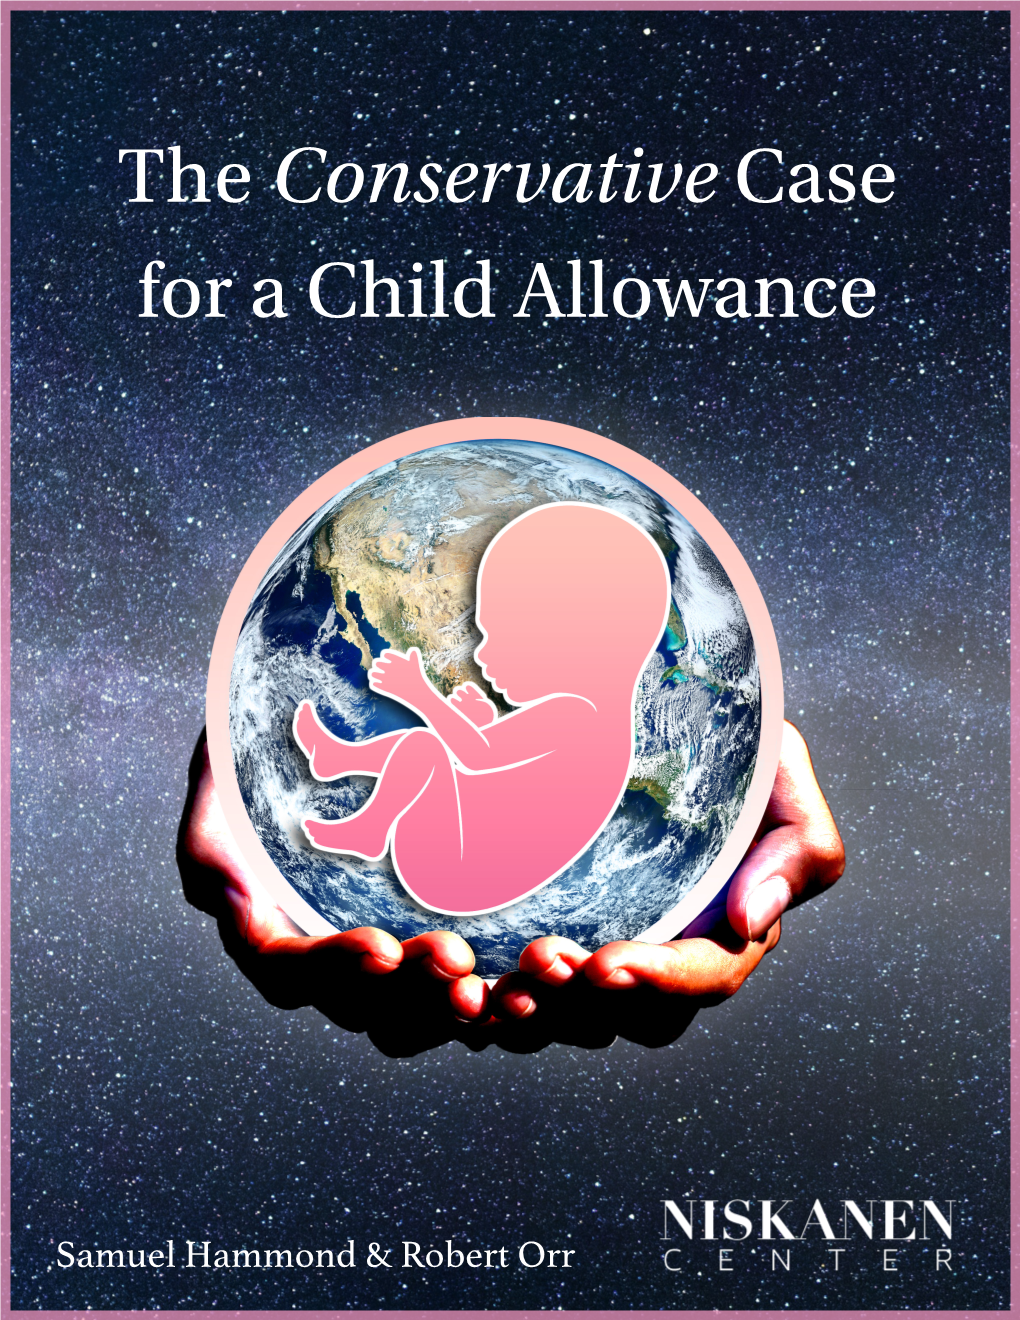 The Conservative Case for a Child Allowance